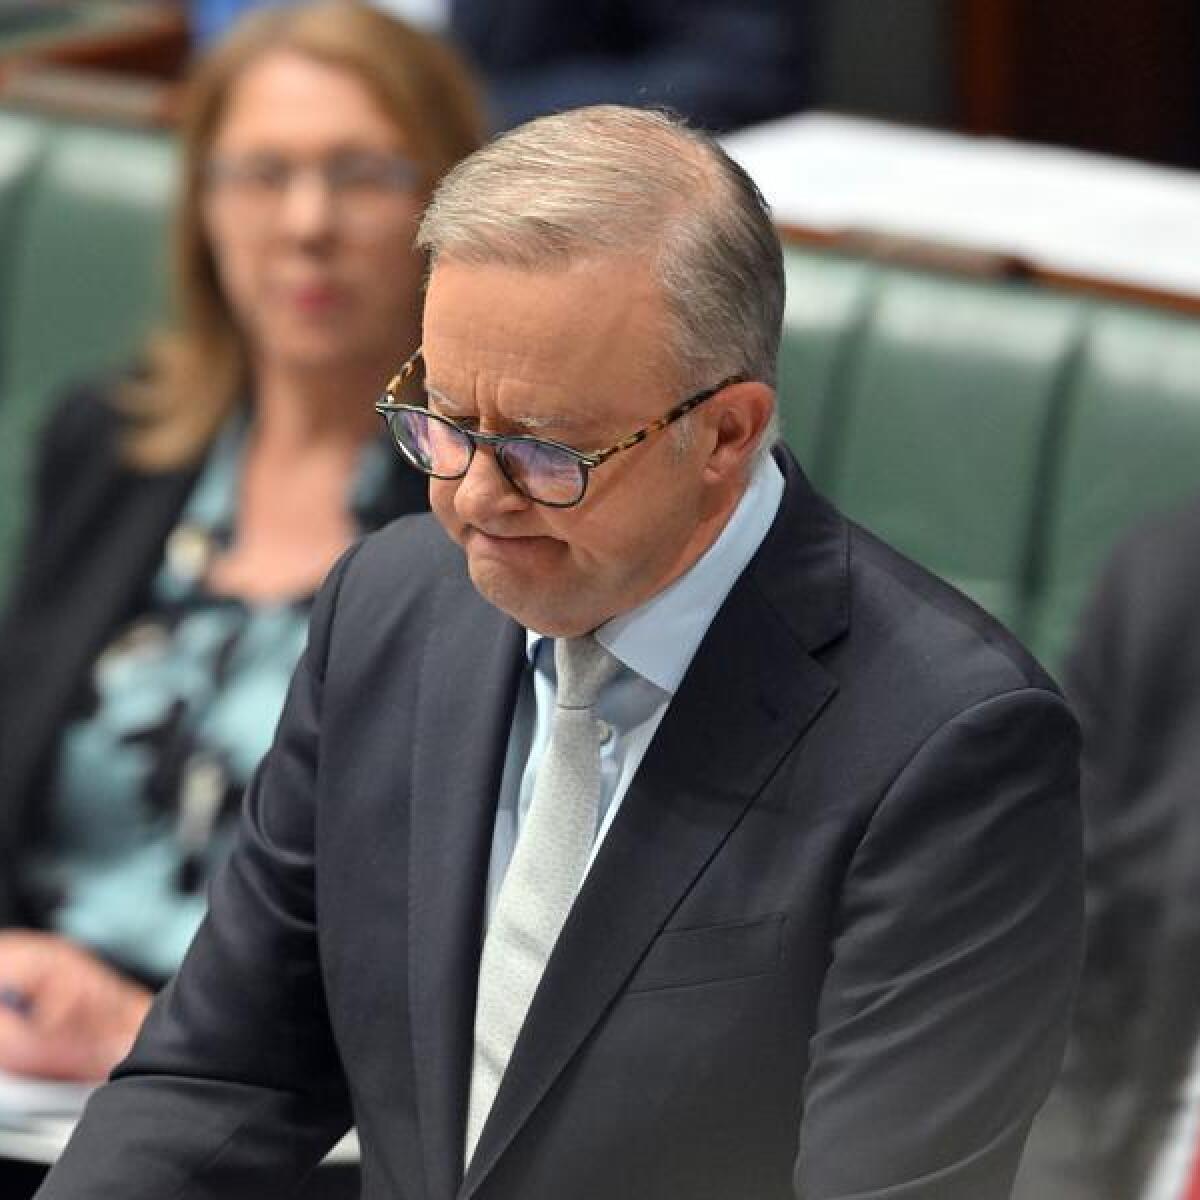 PM Anthony Albanese during a condolence motion for the victims.